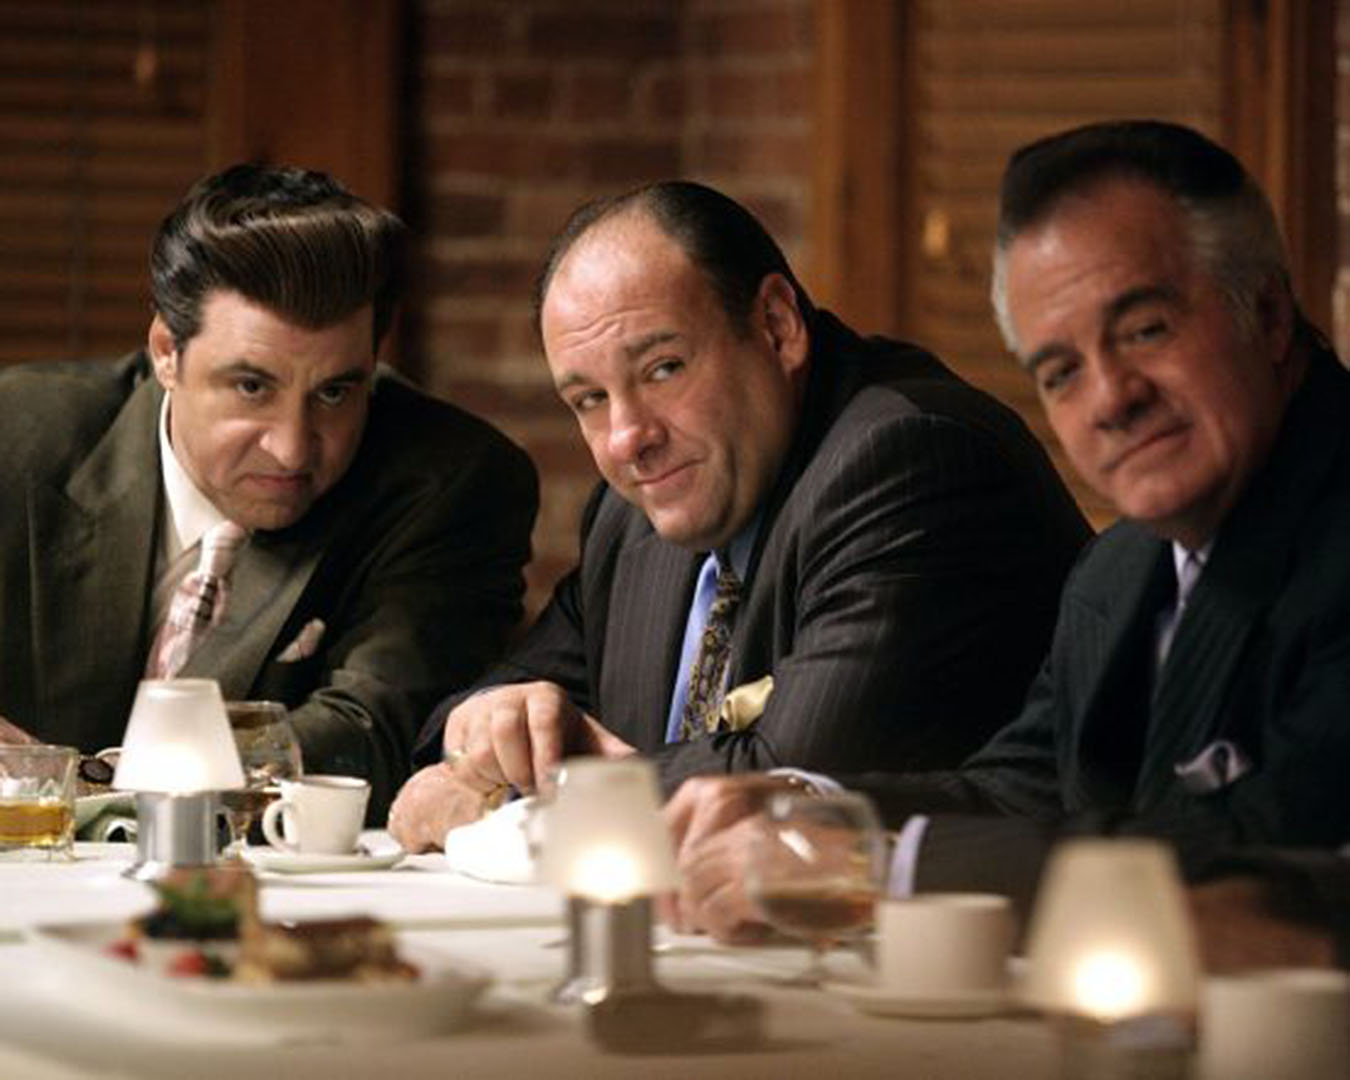 Tony Soprano and his made men sit down to dinner.